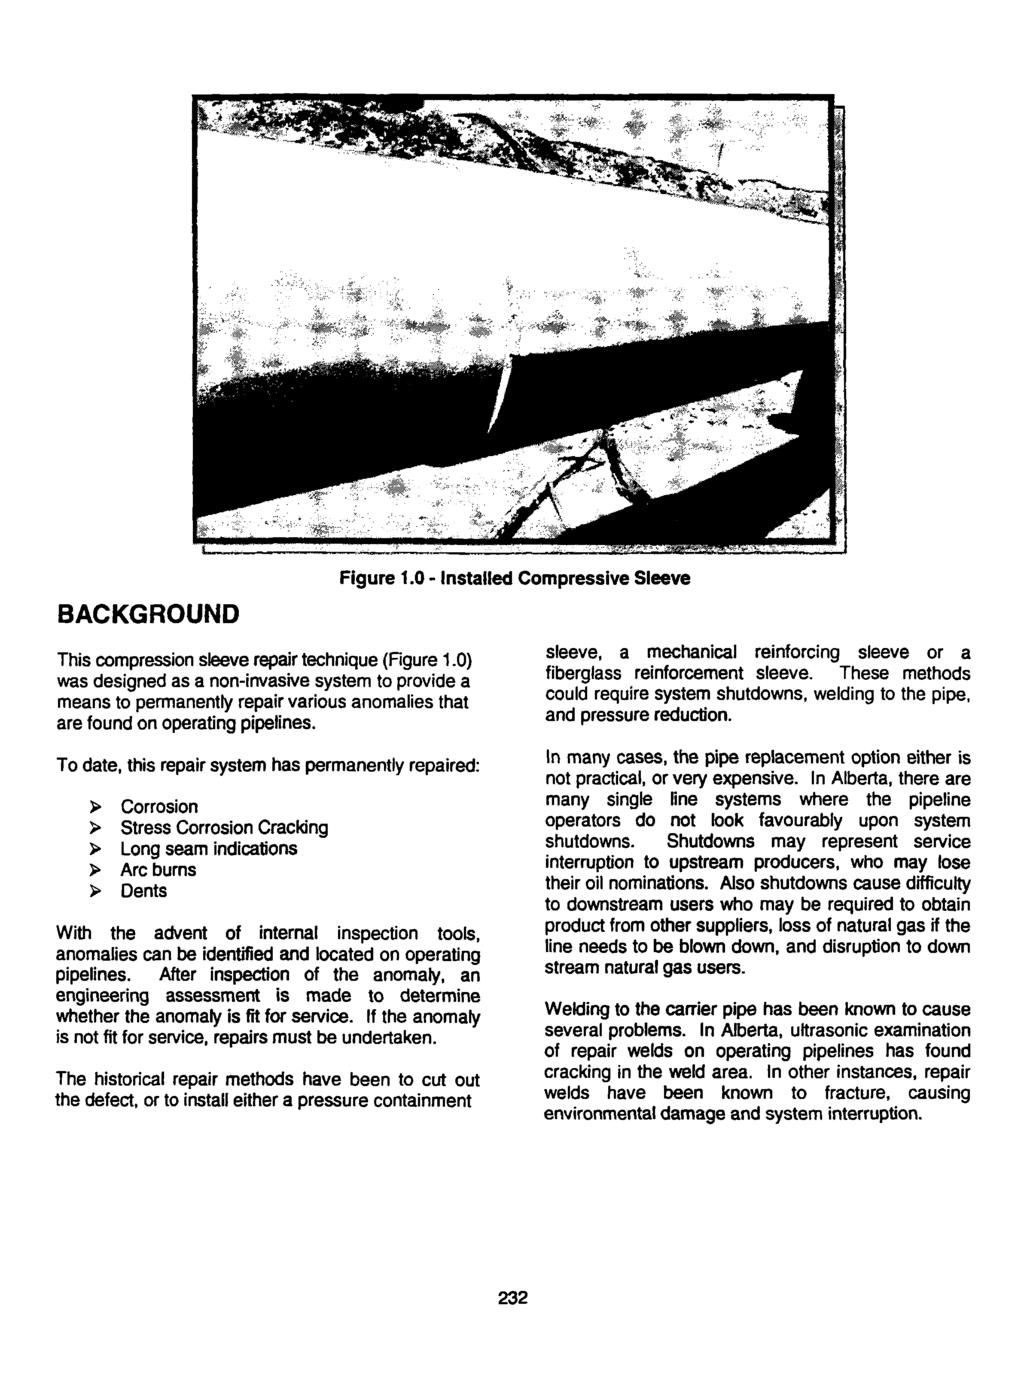 BACKGROUND This compression sleeve repair technique (Figure 1.0) was designed as a non-invasive system to provide a means to permanently repair various anomalies that are found on operating pipelines.